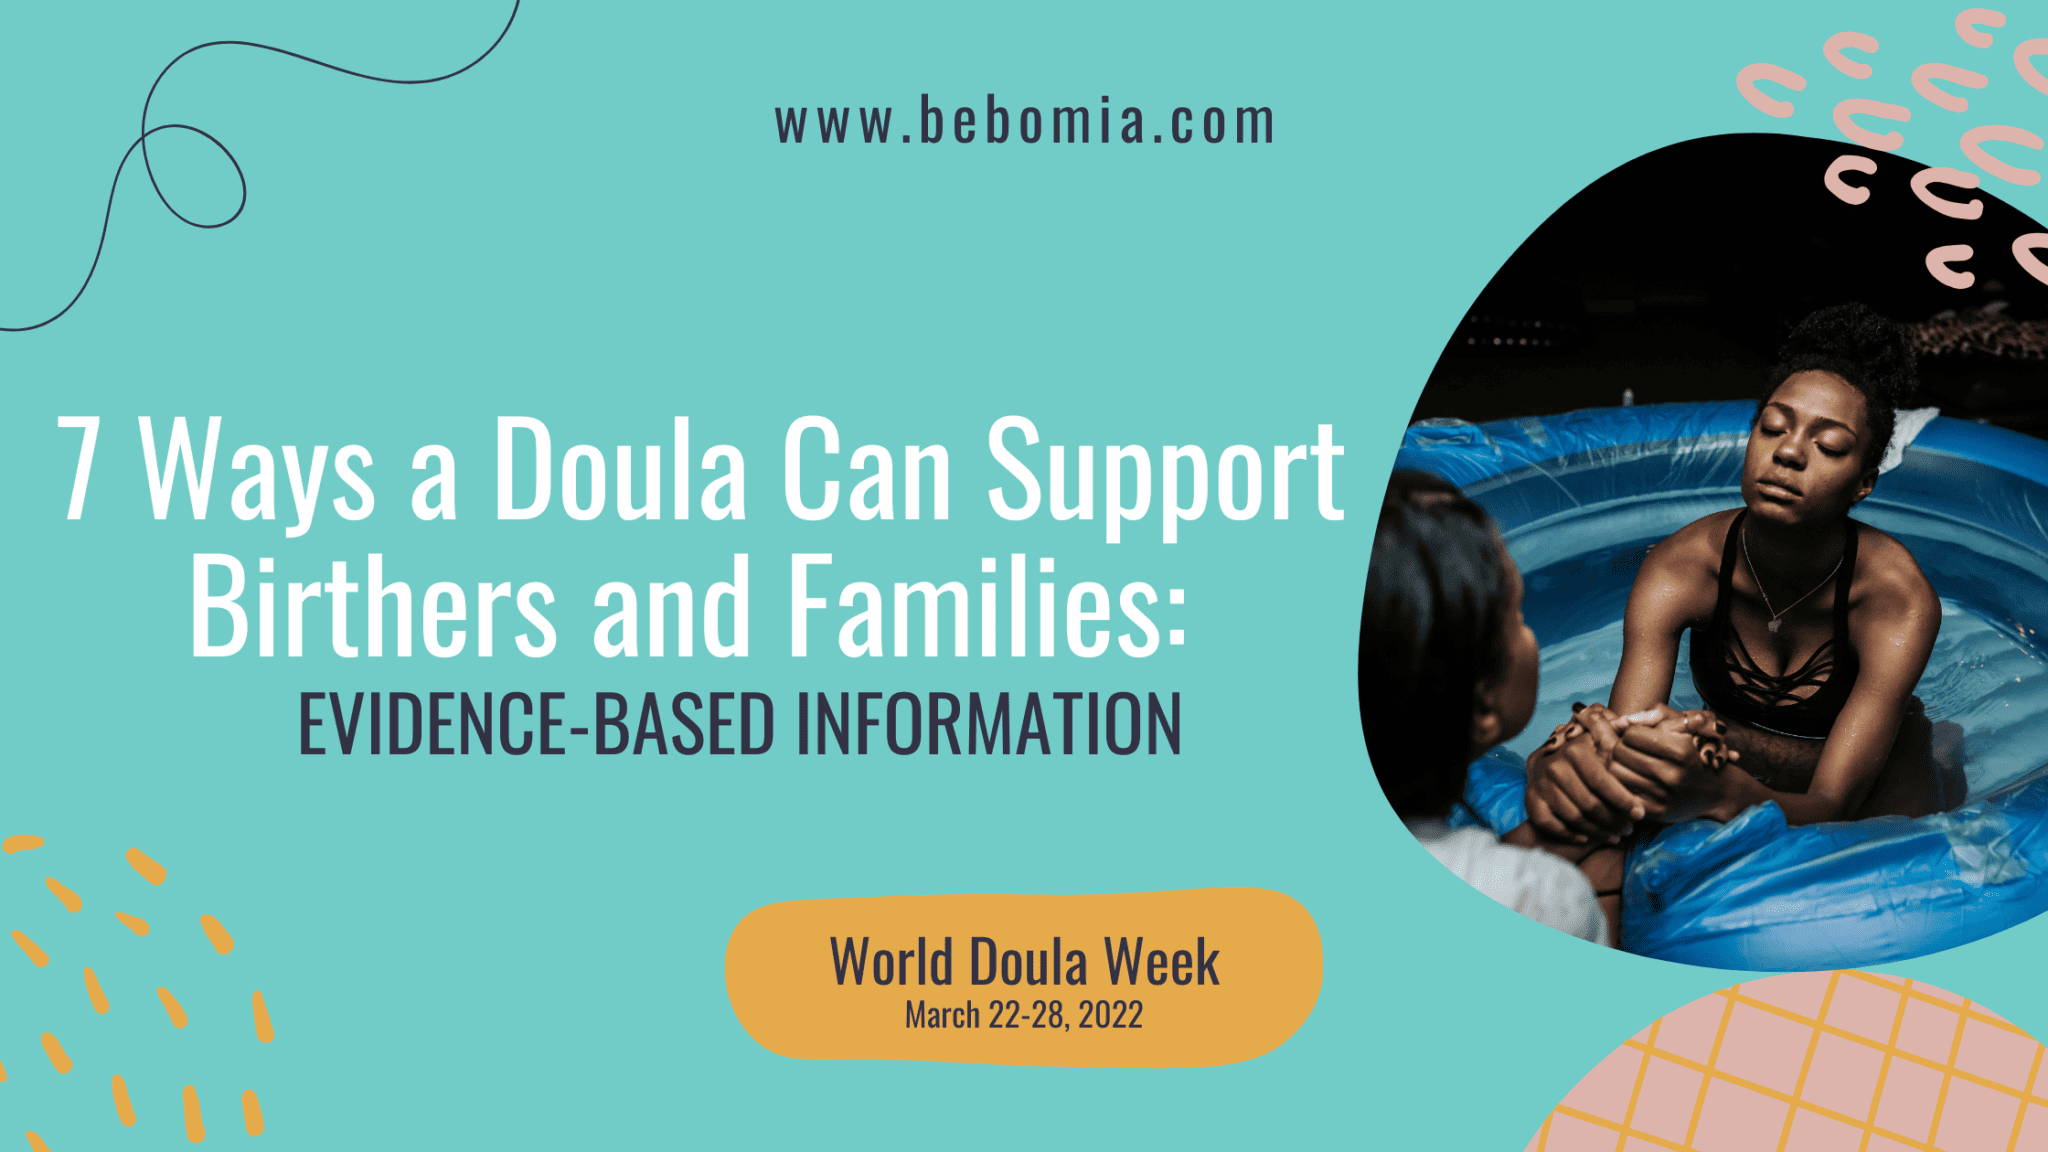 Doula support